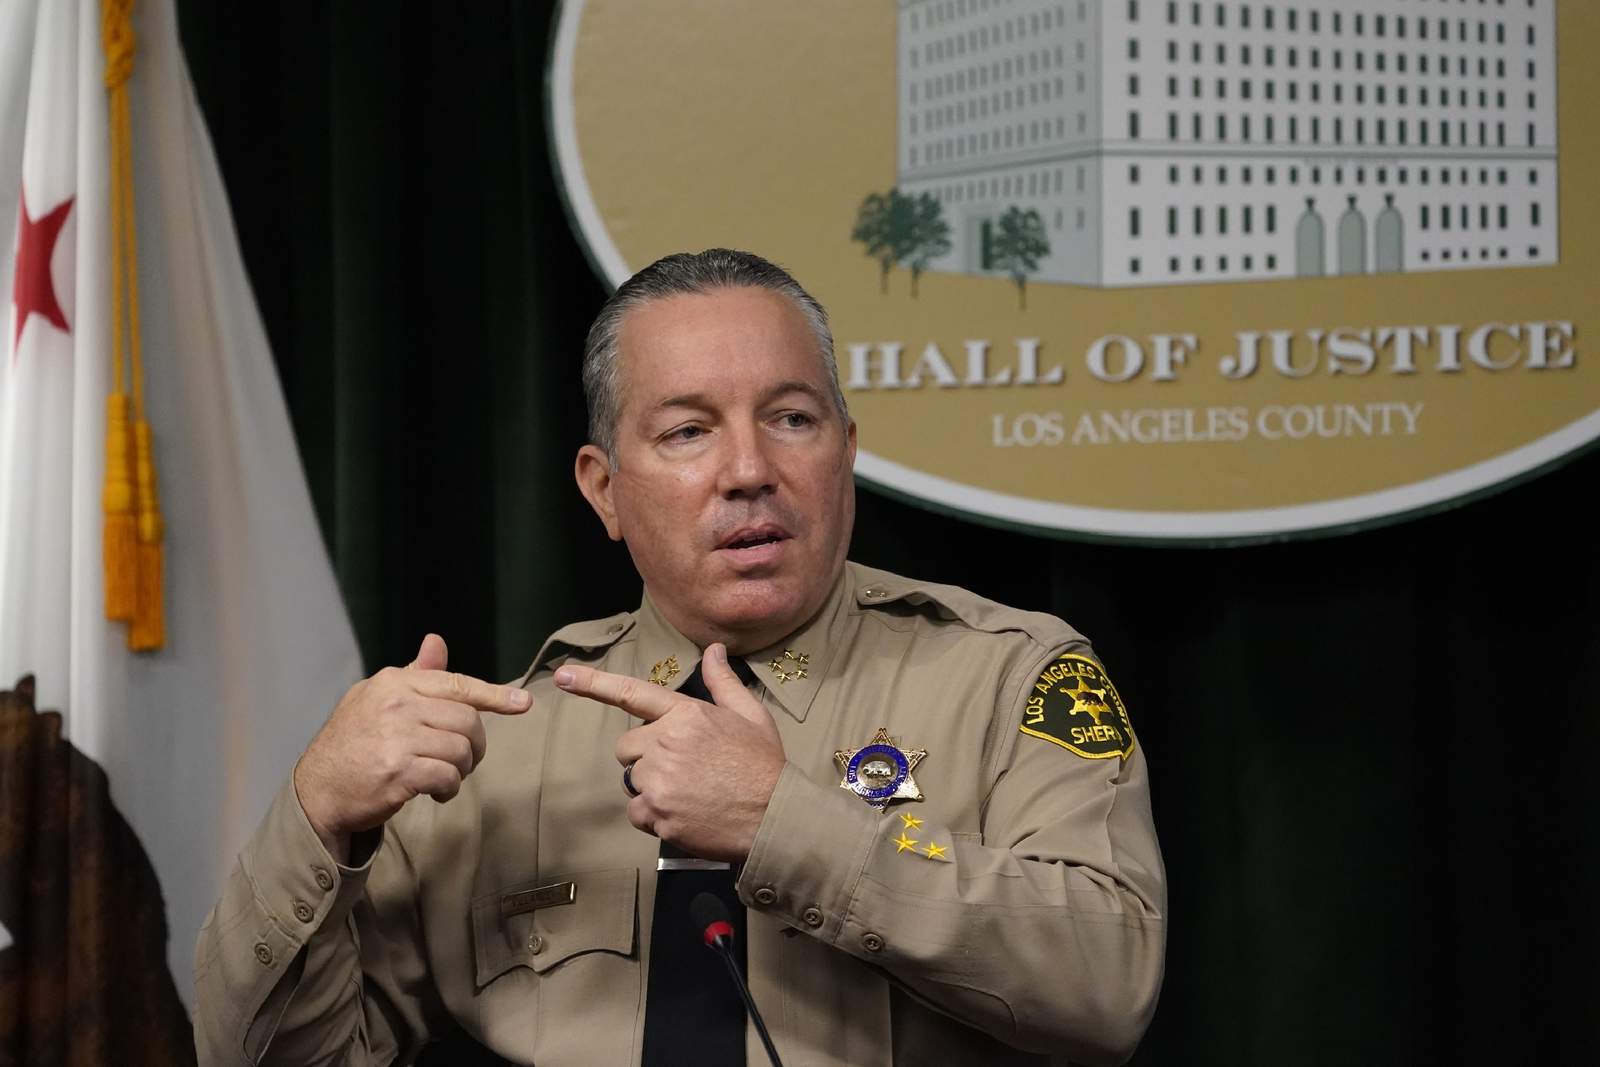 State investigates Los Angeles County Sheriff's Department